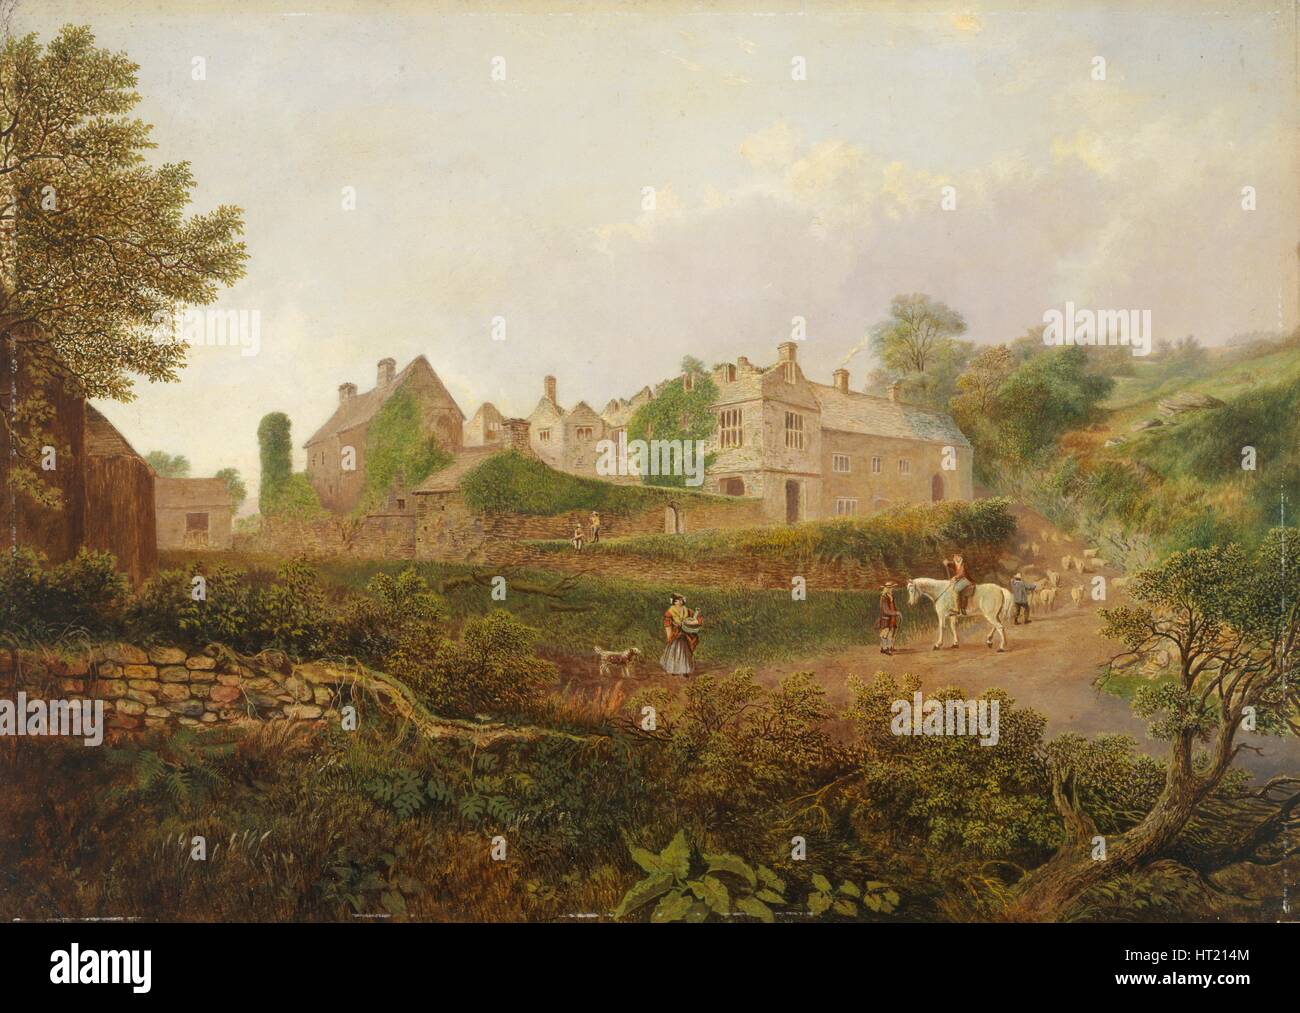 'Le Van, Caerphilly', 1834-1889. Artiste : Thomas Waters Banque D'Images